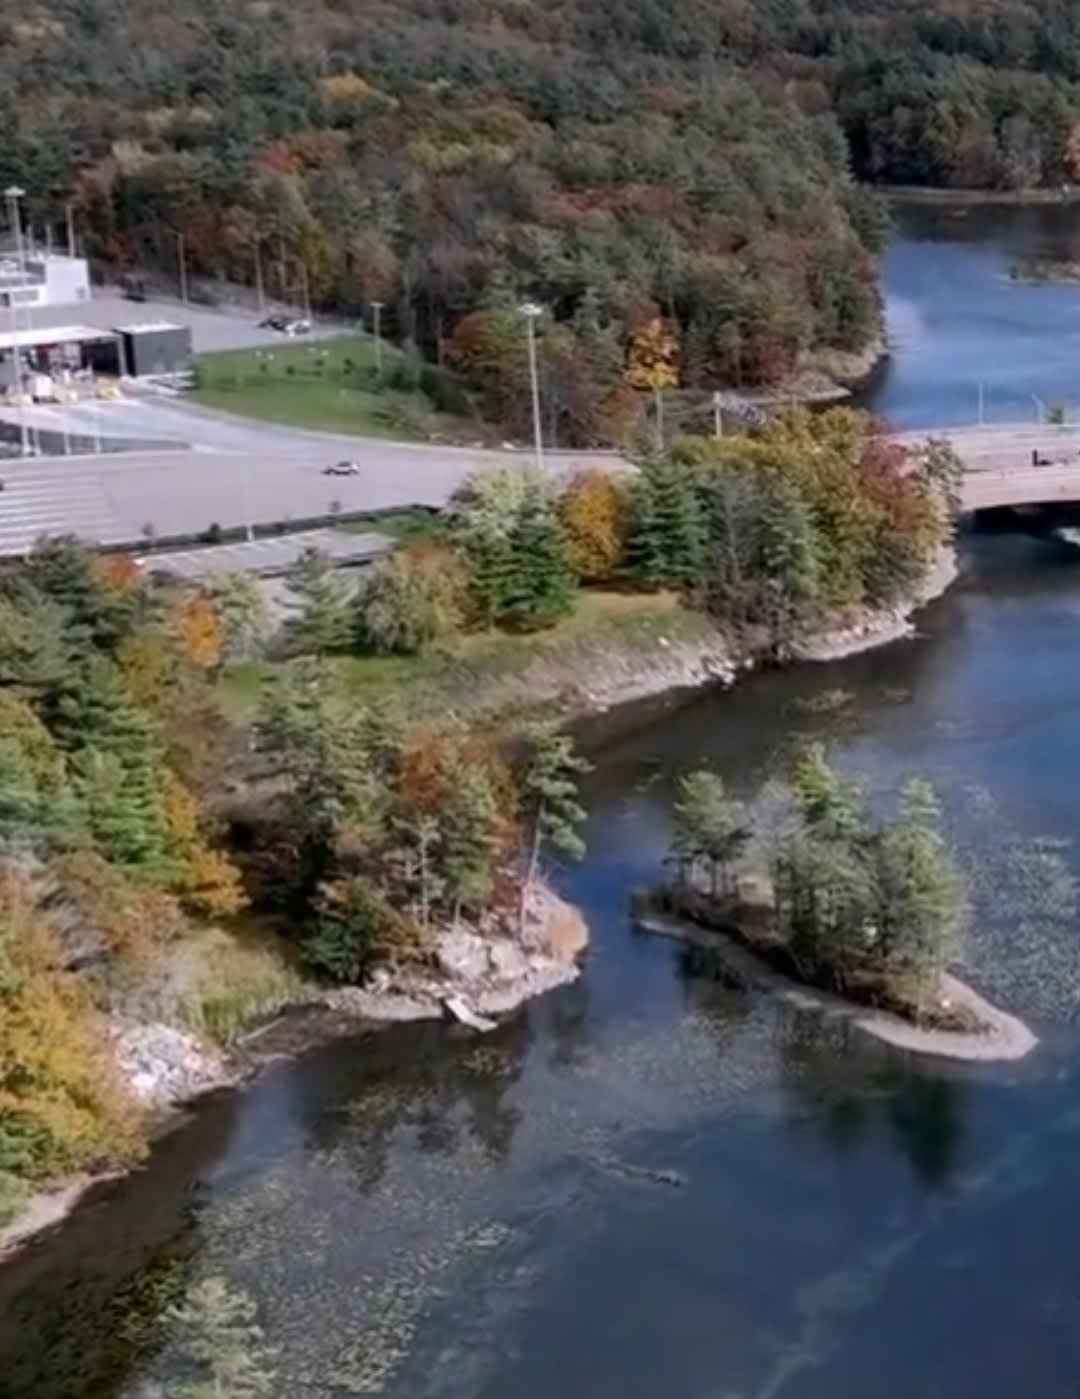 Aerial view of the islands. Spirit island on the left and Phantom island on the right with the Canadian customs in the background on Hill island